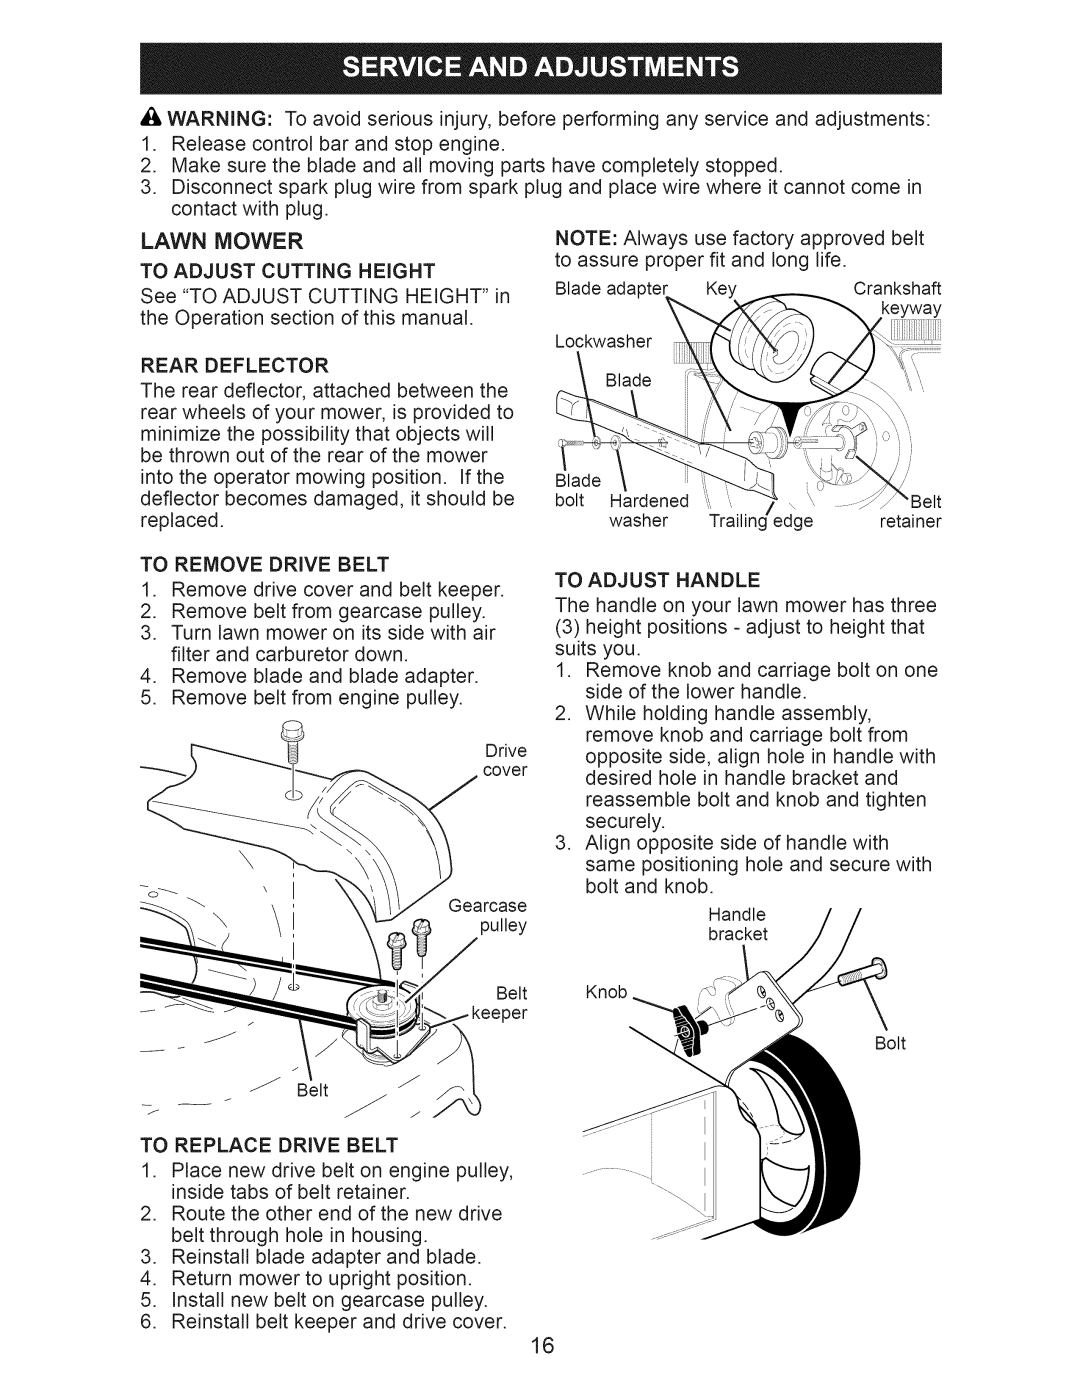 Craftsman 917.374160 owner manual Rear Deflector, To Remove Drive Belt, To Replace Drive Belt, To Adjust Handle 